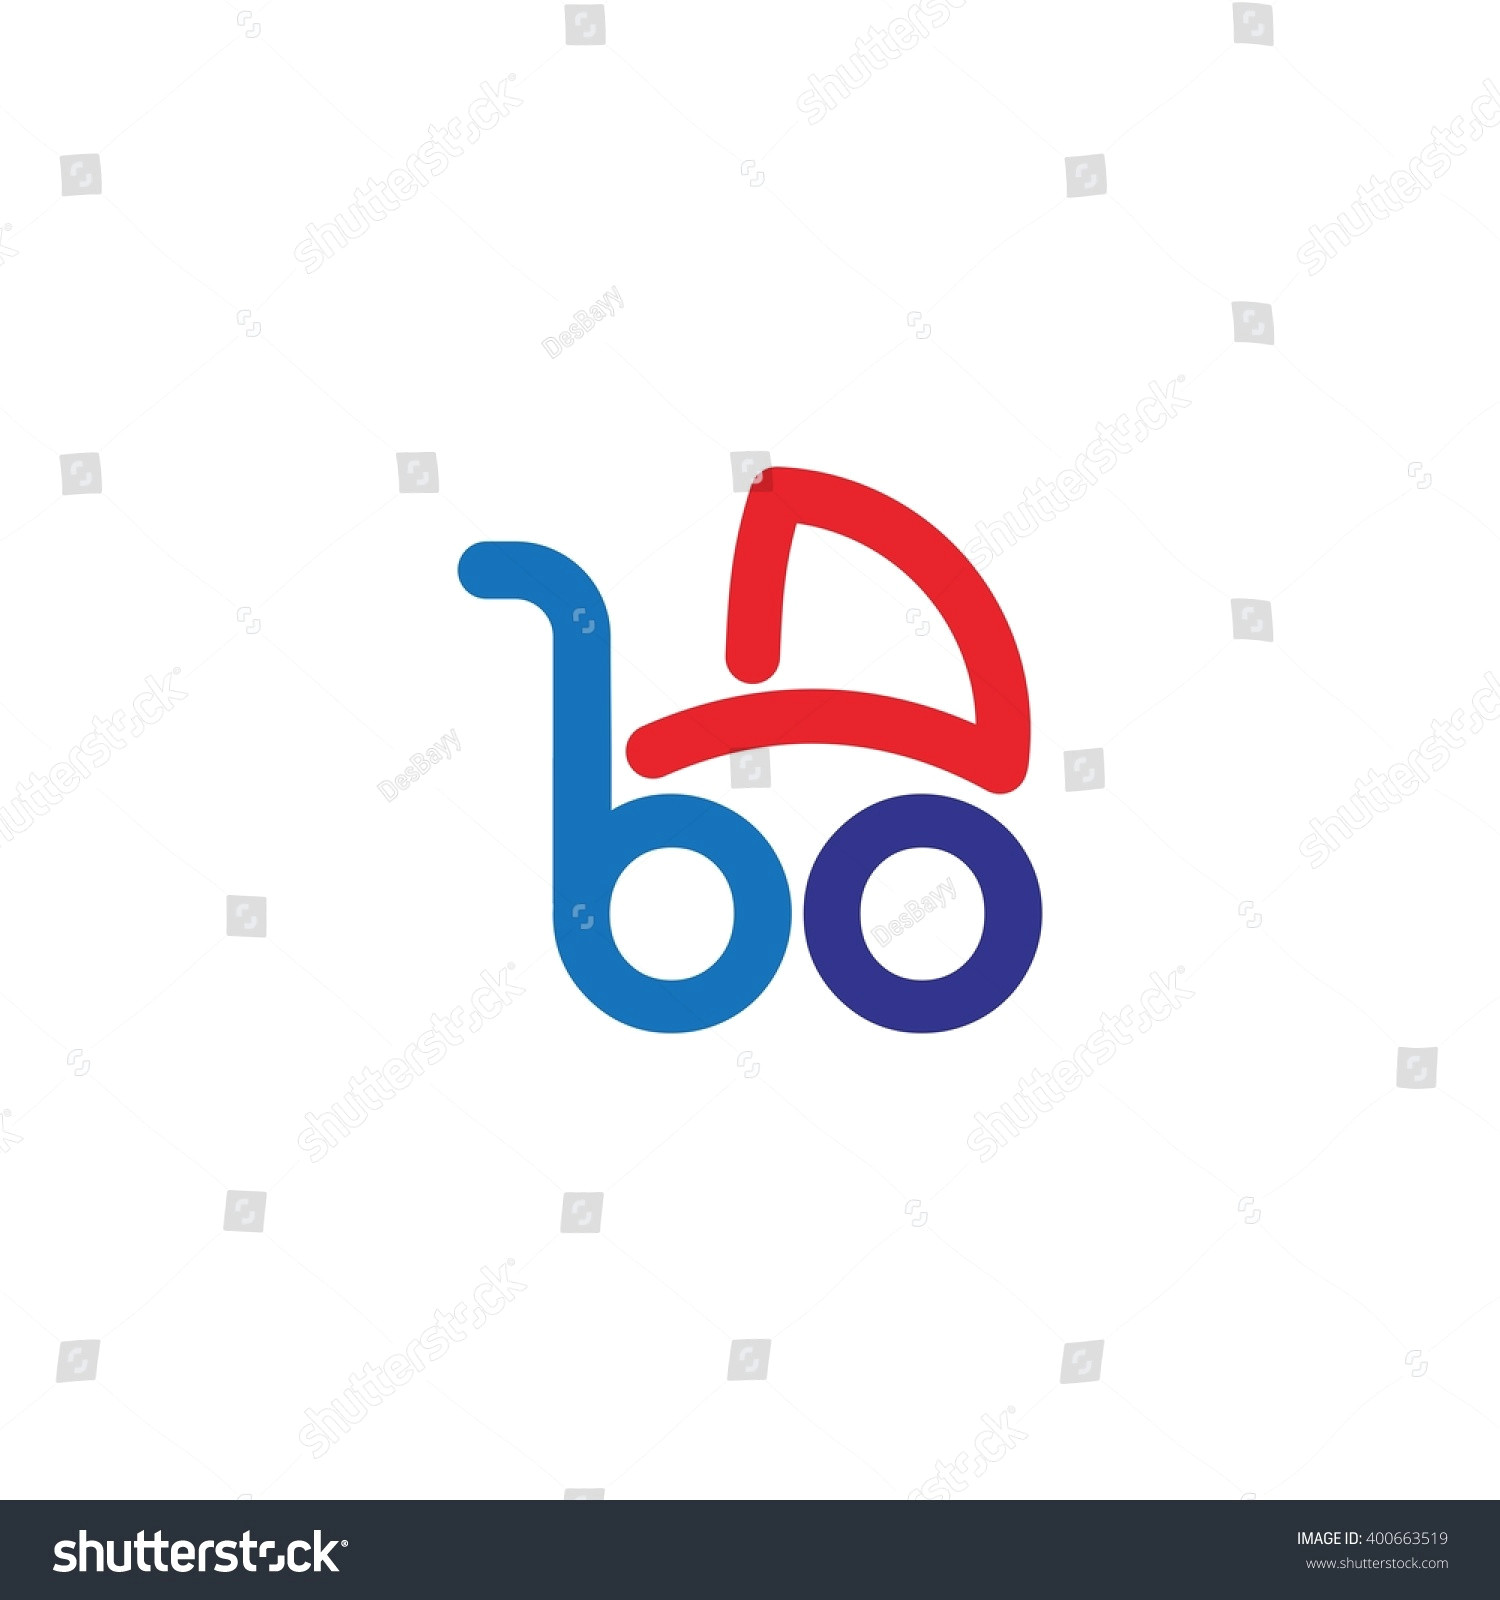 Easy Drawing Of Eid Cool Easy to Draw Logos Od Stroller Logo Stock Vector Shutterstock